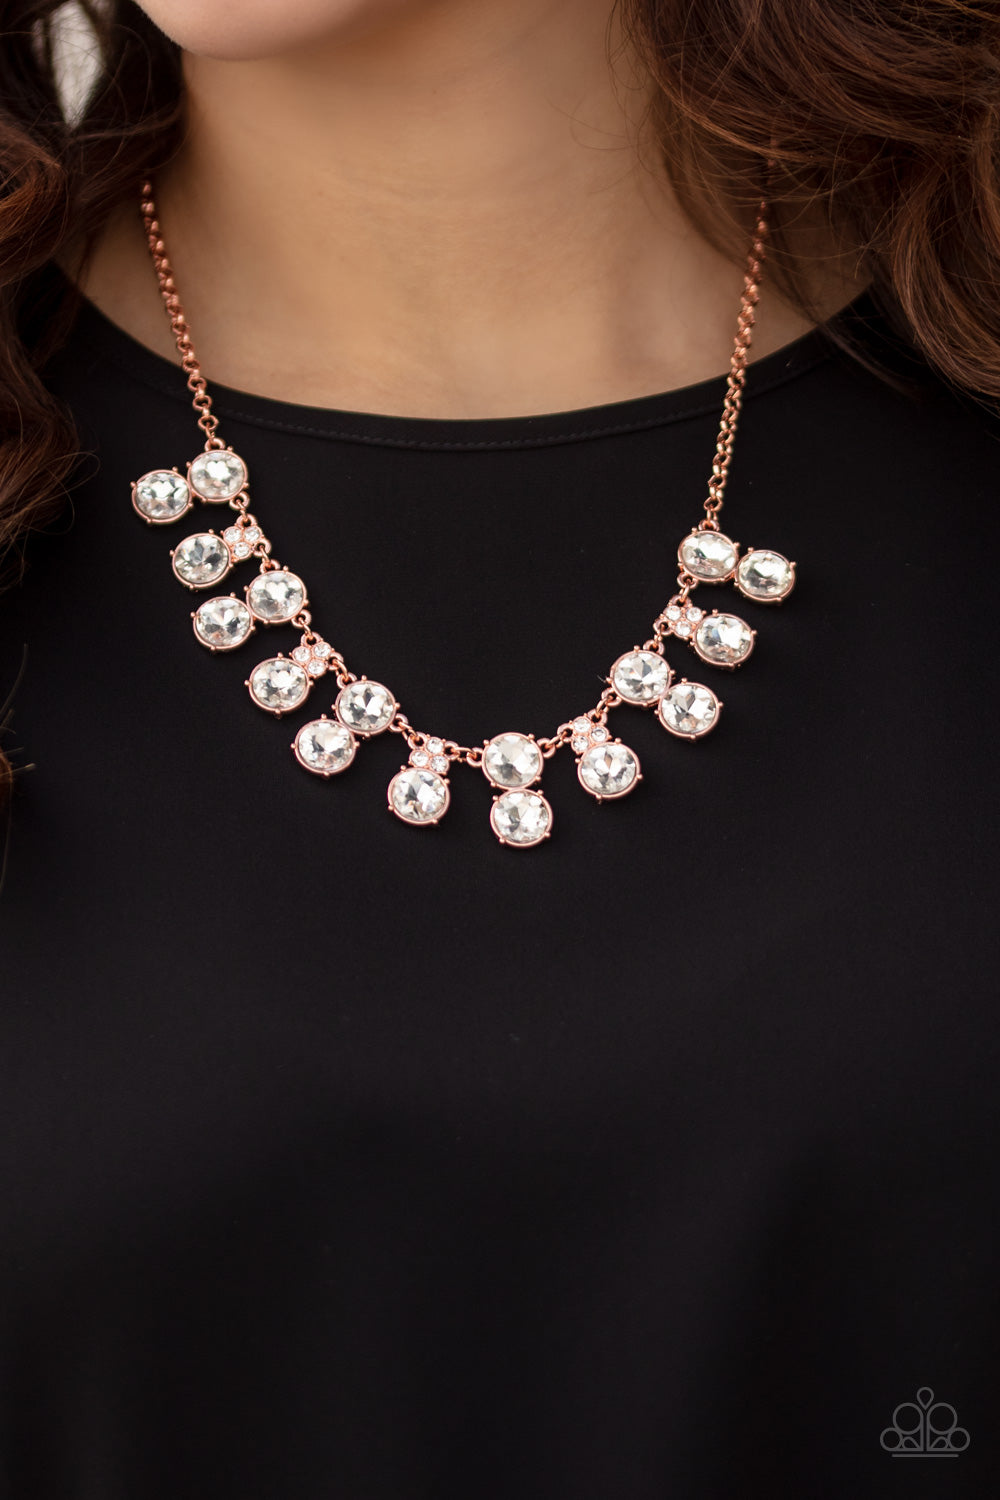 Top Dollar Twinkle Copper Necklace - Paparazzi Accessories